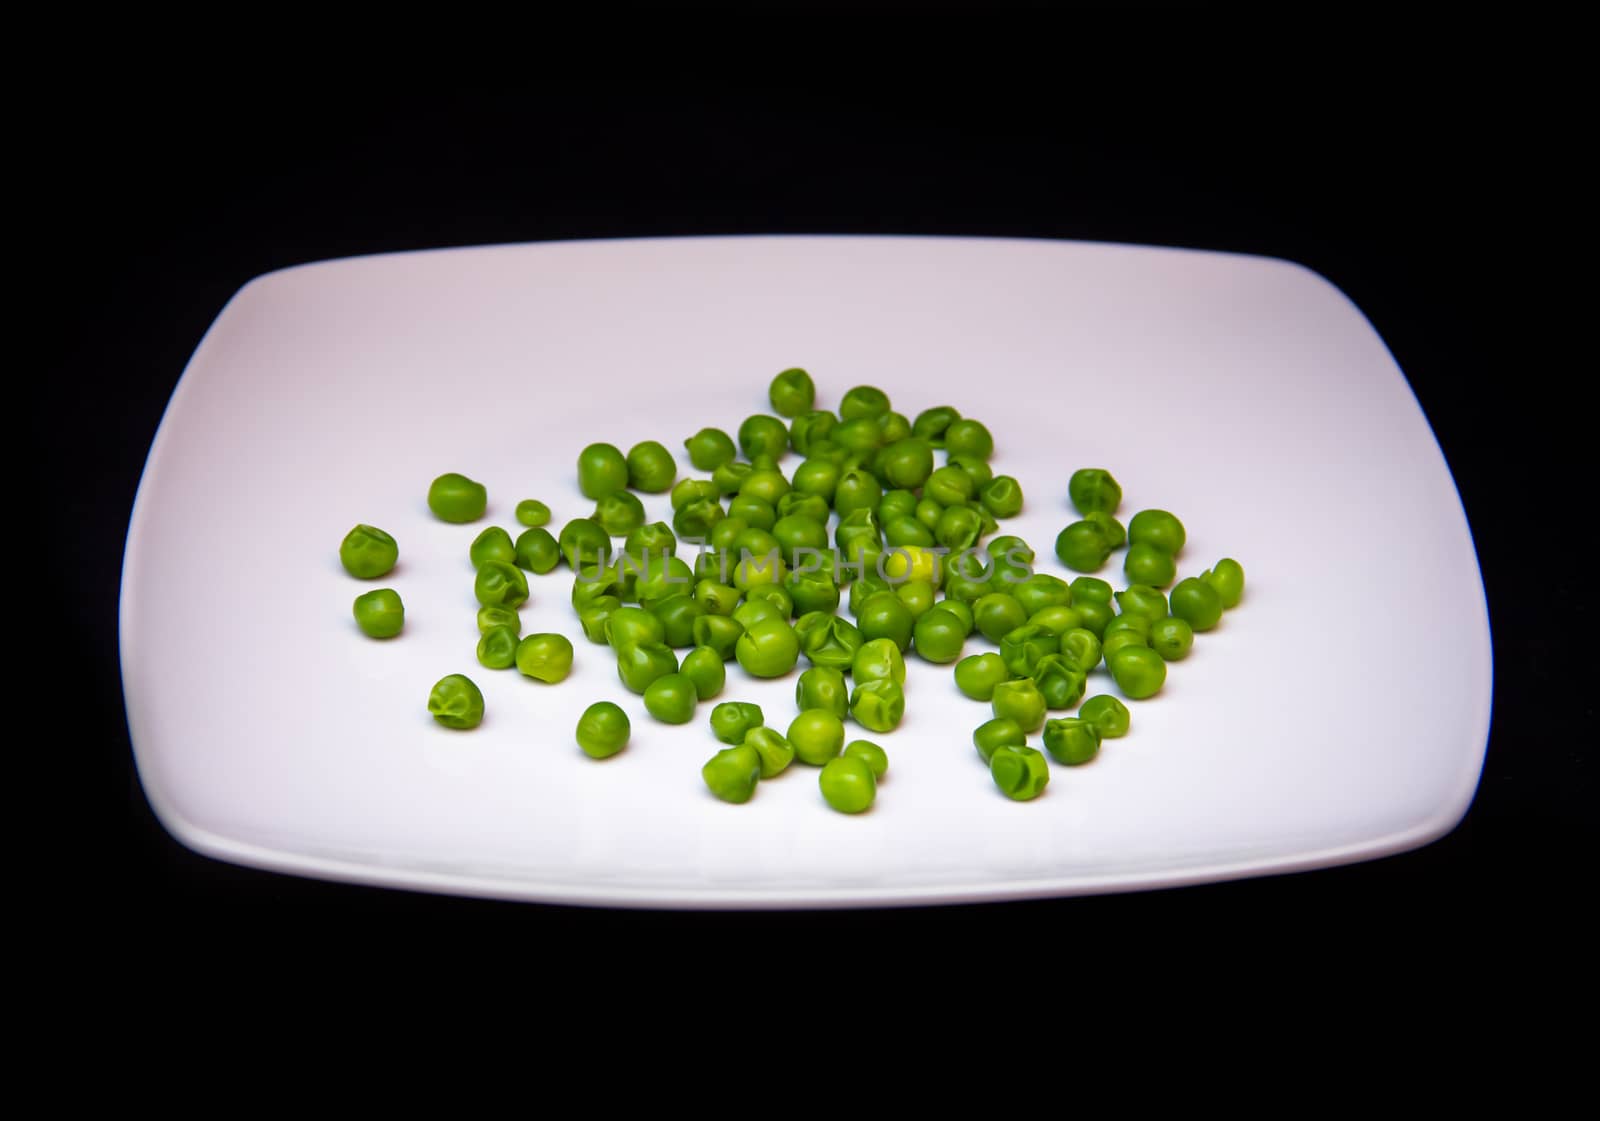 Plate with peas on a black background